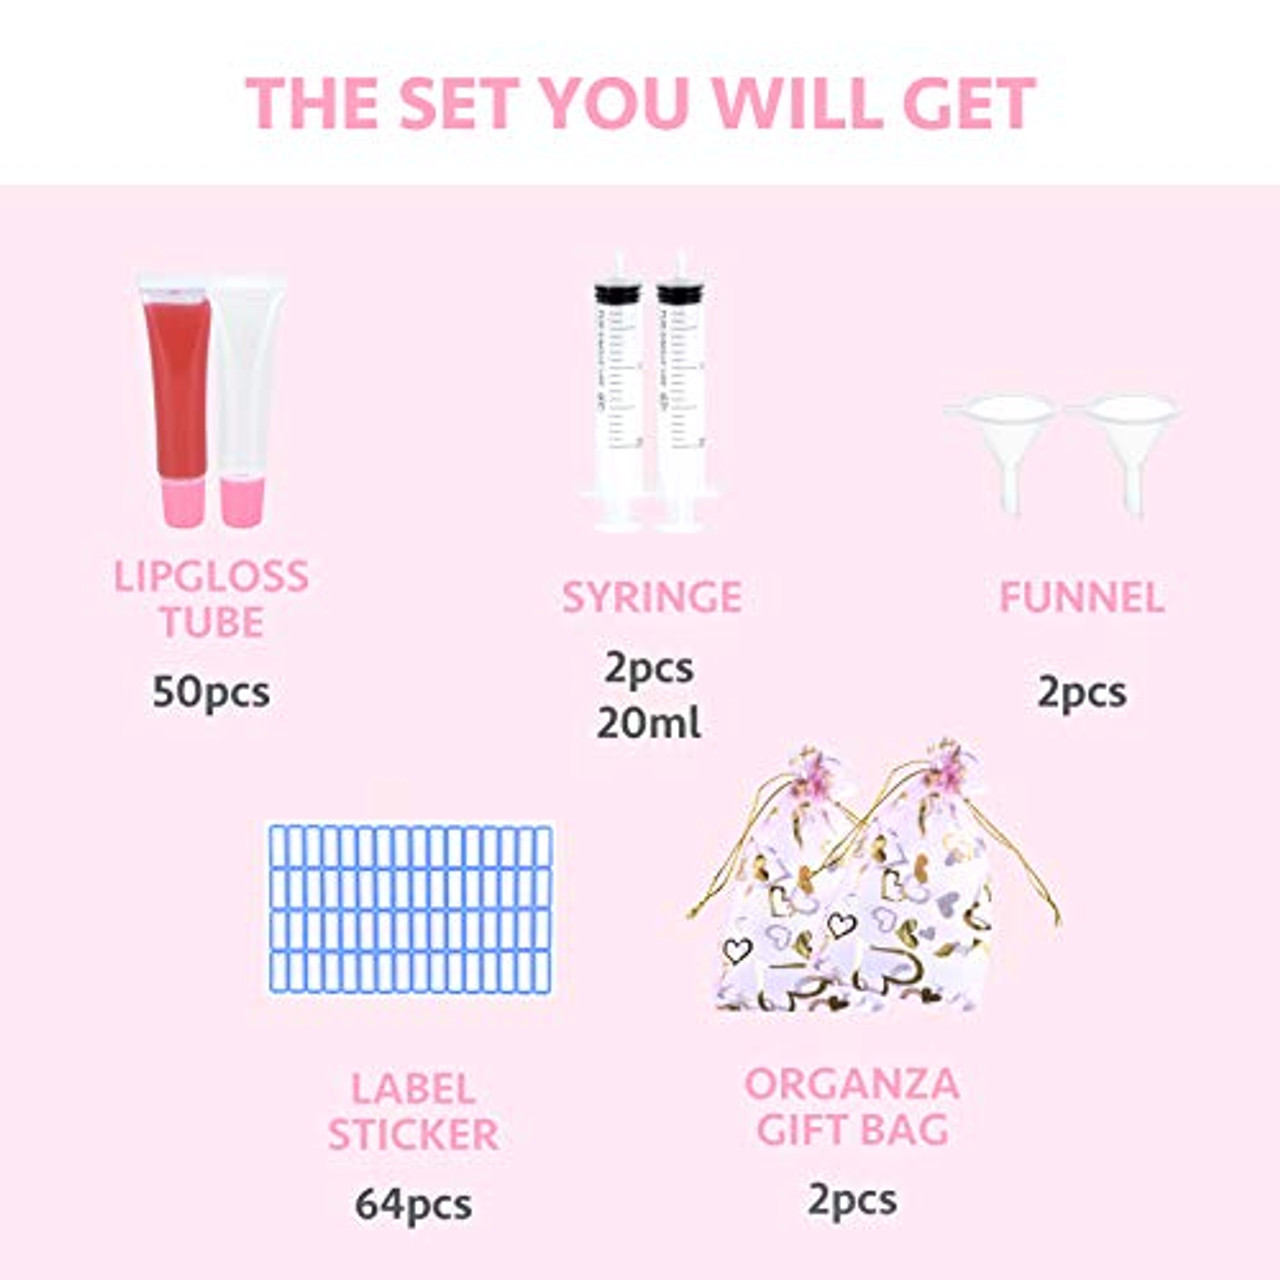 AMORIX 50PCS Lip Gloss Tubes 15ml Gold Cap Lip Gloss Containers Empty Lip  Balm Tubes Refillable Cosmetic Squeeze Lipgloss Tubes + 2 x 20ml Syringes